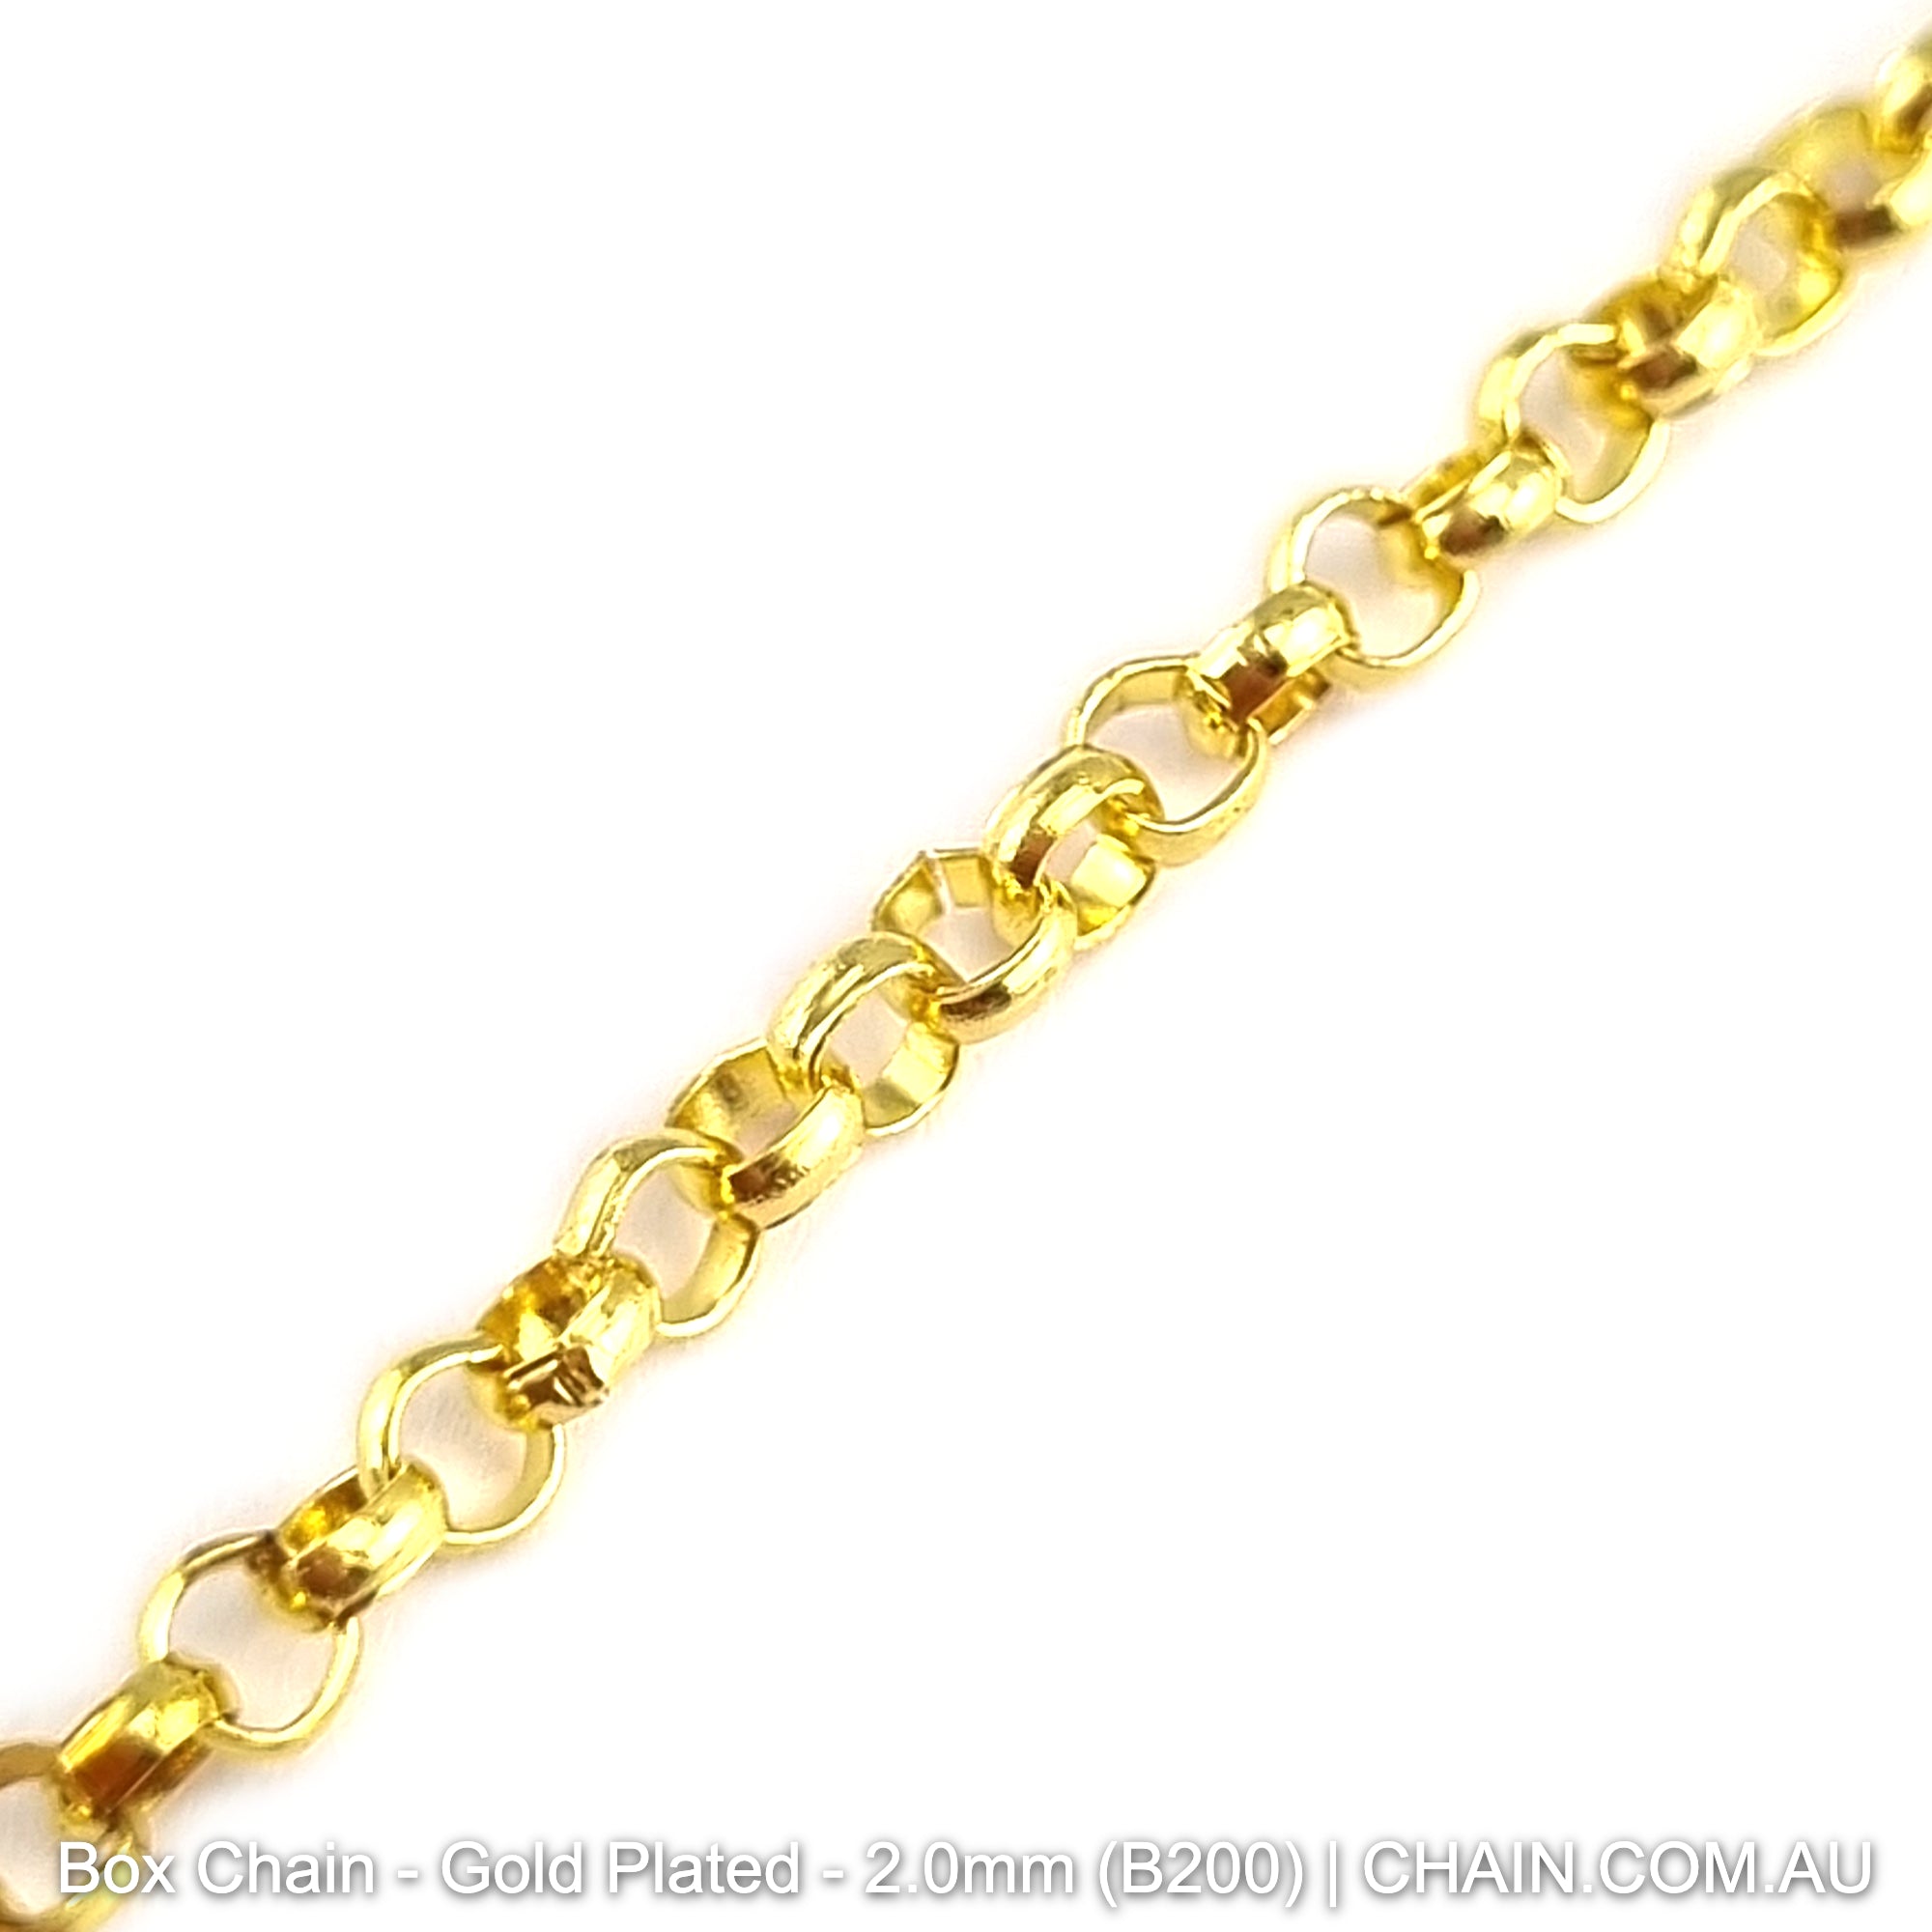 Box Jewellery Chain Gold Plated. Size: 2.0mm x 25m Reel. Shop Jewellery Chain online. Australia wide shipping. Chain.com.au